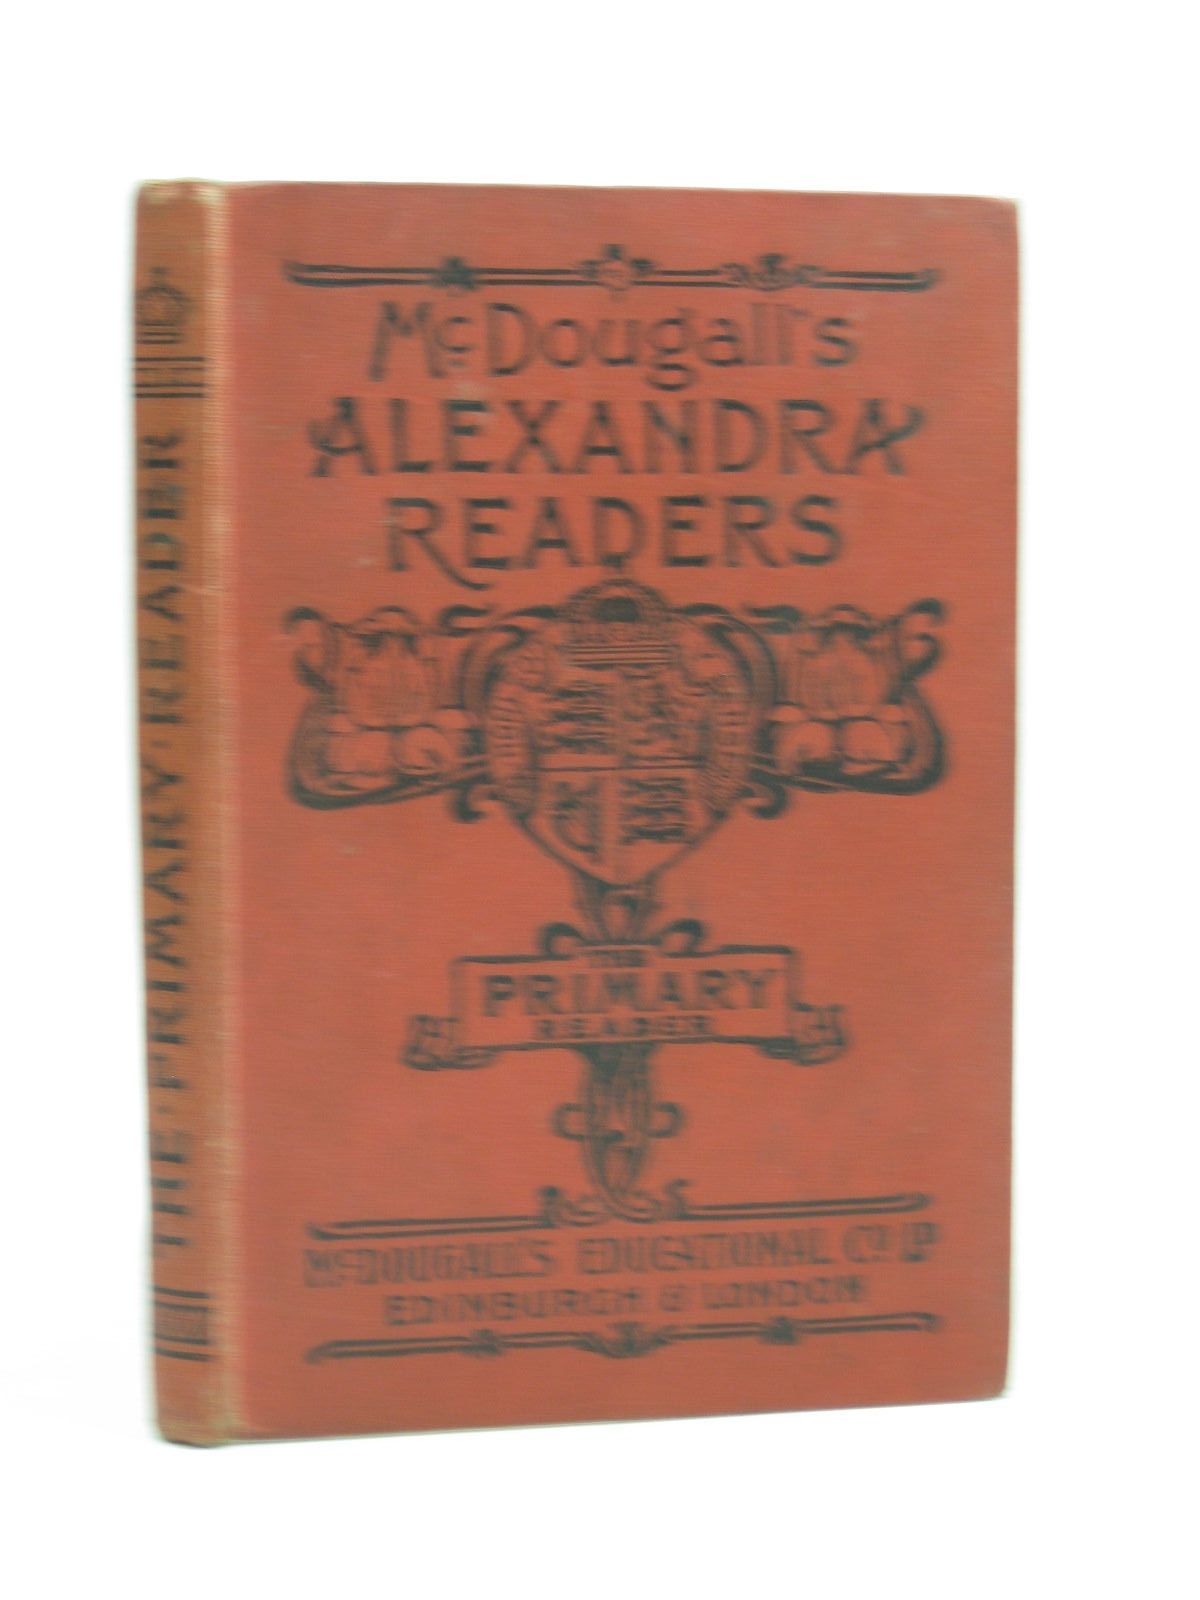 Photo of MCDOUGALL'S ALEXANDRA READERS - THE PRIMARY READER illustrated by Brown, Michael et al., published by McDougall's Educational Co. Ltd. (STOCK CODE: 1314418)  for sale by Stella & Rose's Books